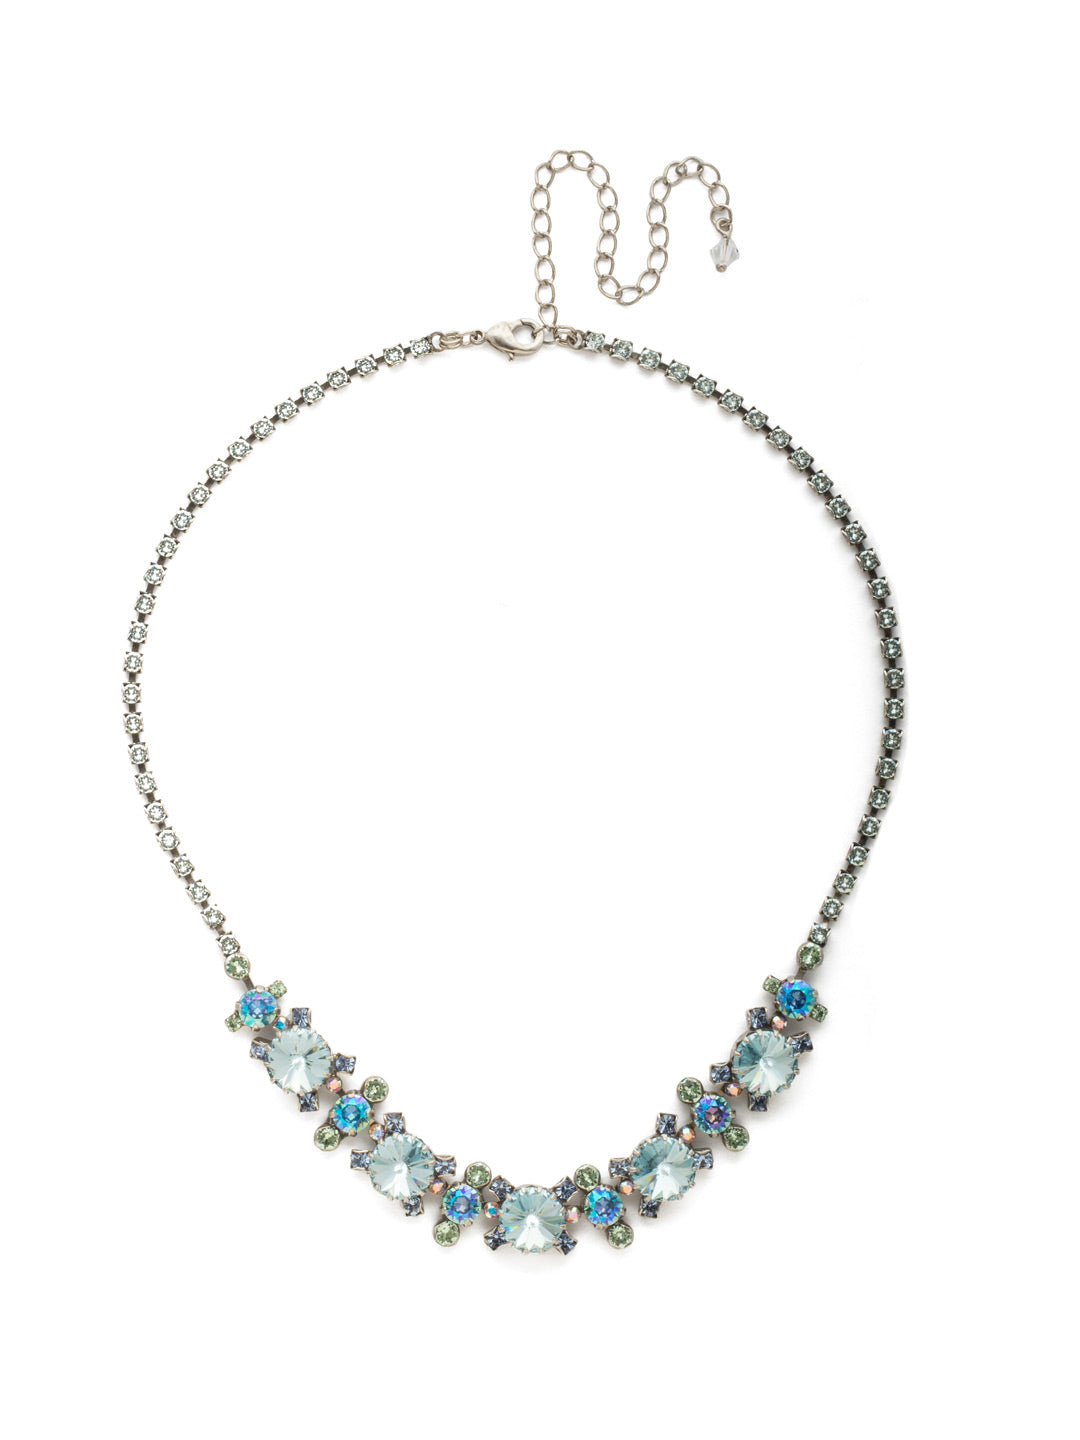 Connect the Dots Necklace Tennis Necklace - NDM40ASOCM - Five rivoli cut crystals are intermixed with a dainty design and accented by a rhinestone chain. From Sorrelli's Ocean Mist collection in our Antique Silver-tone finish.